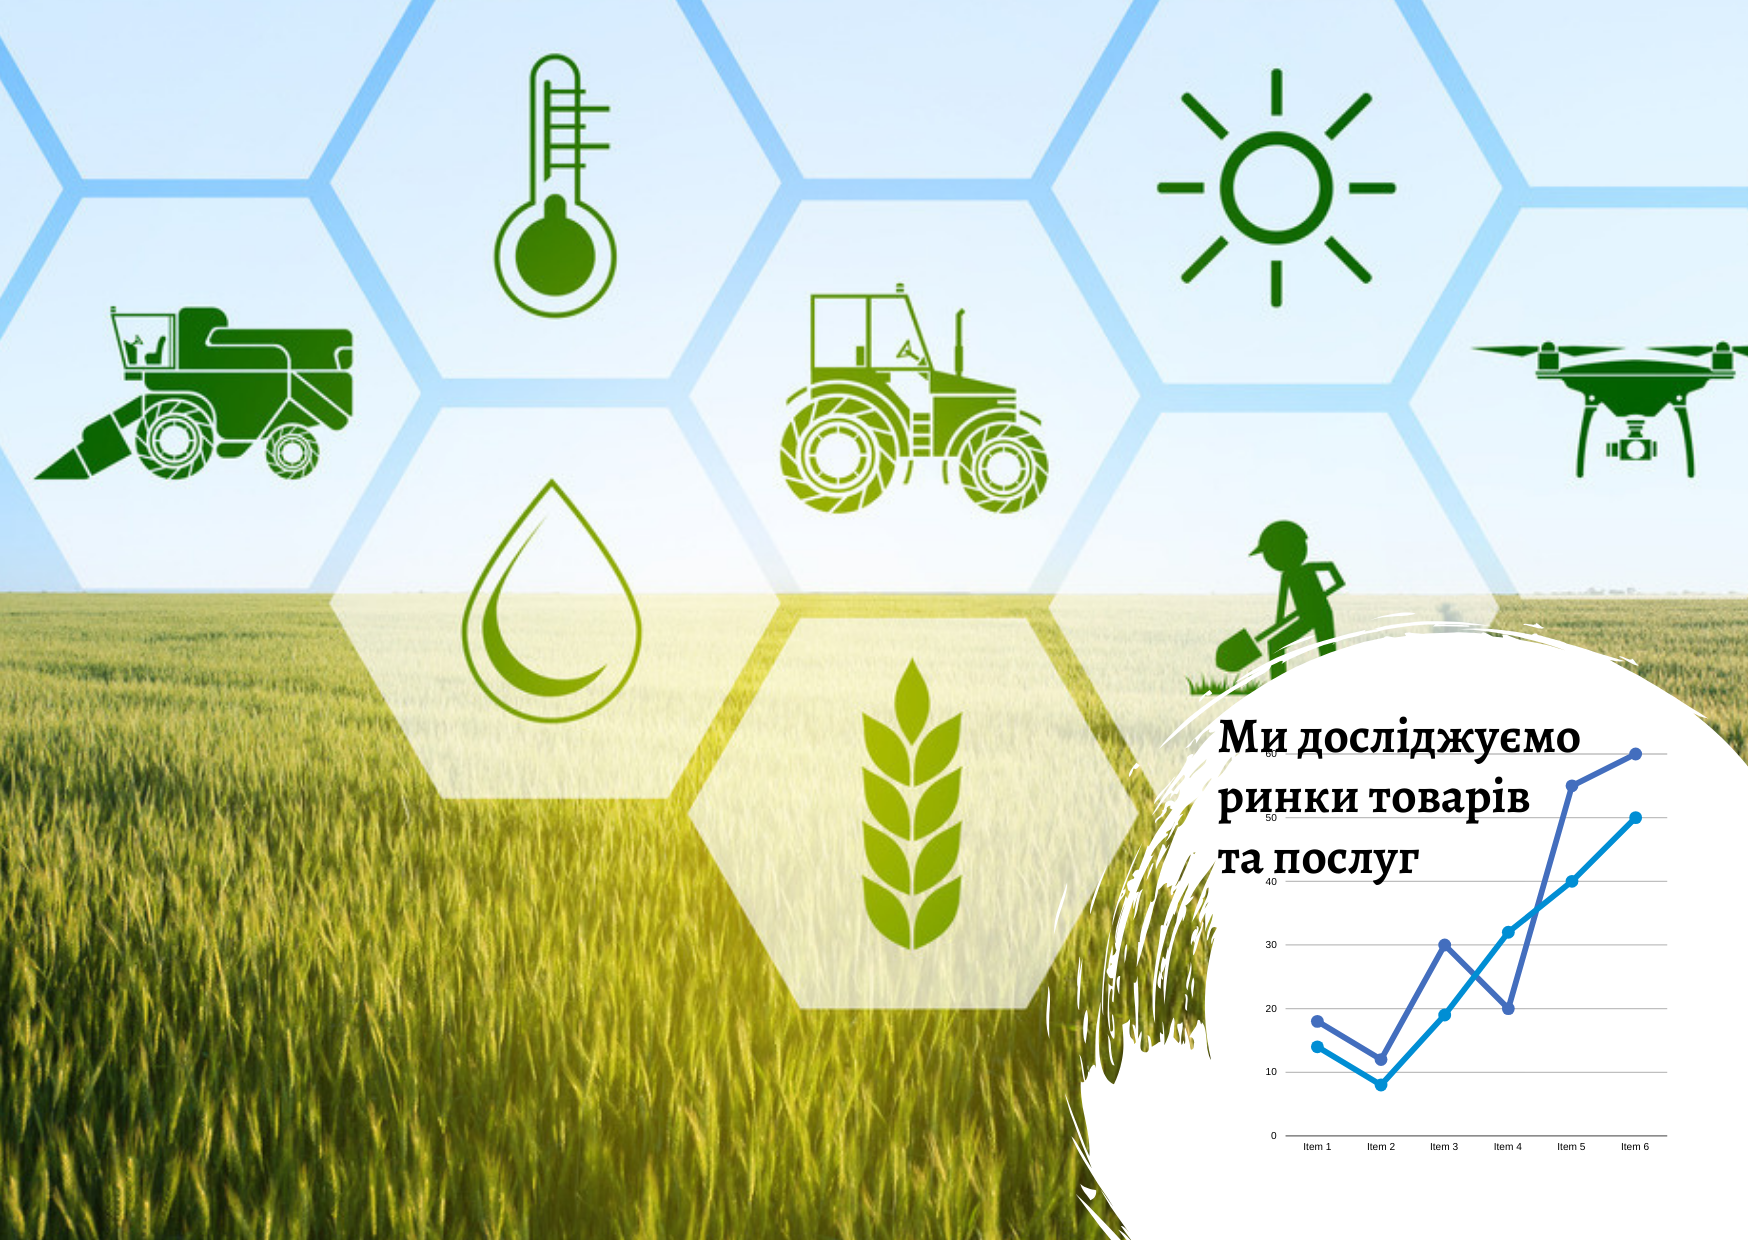 Ukrainian agricultural marketplace market: recommendations for new players